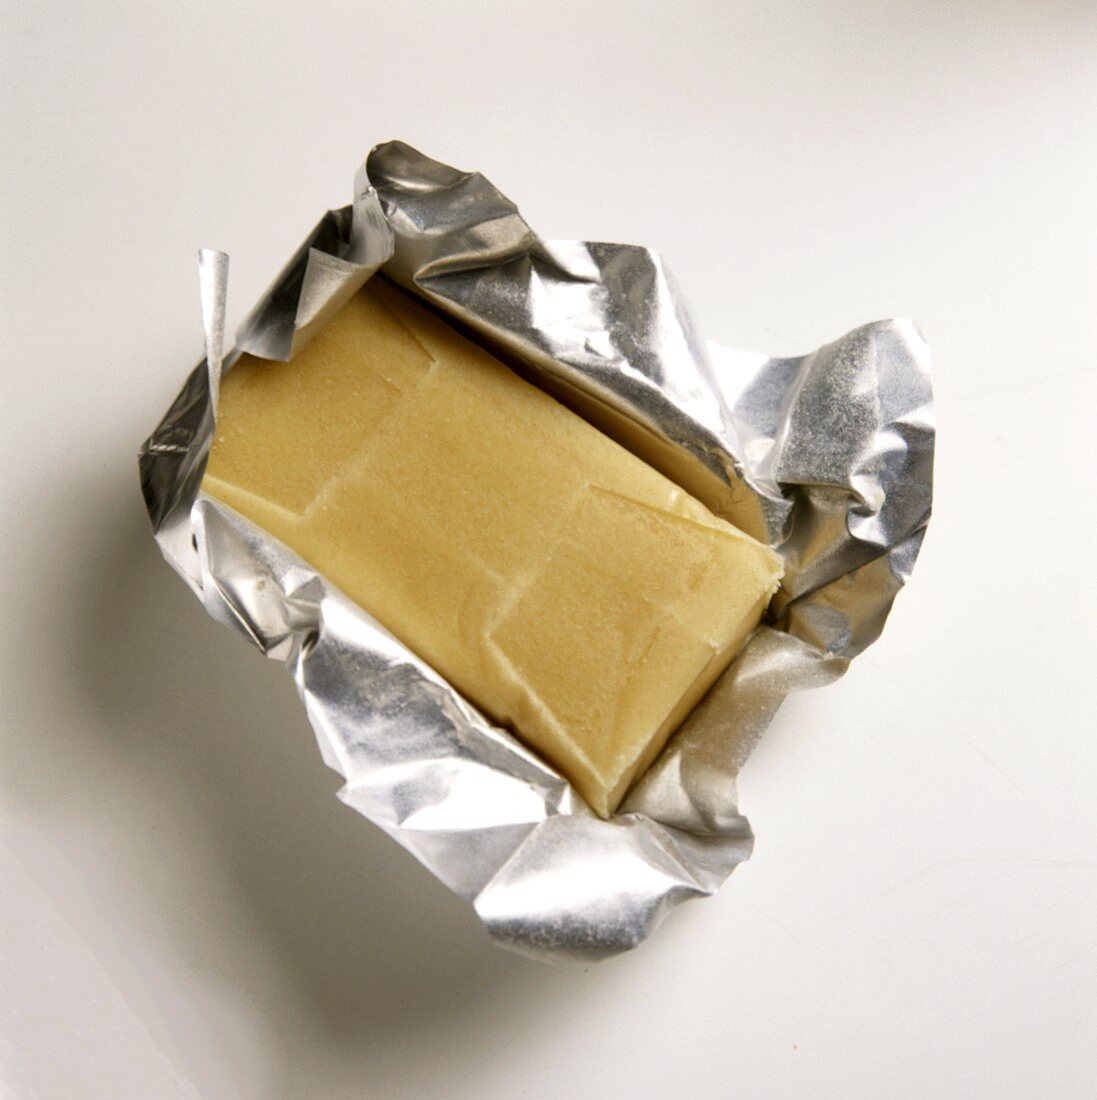 Marzipan in a Foil Wrapper